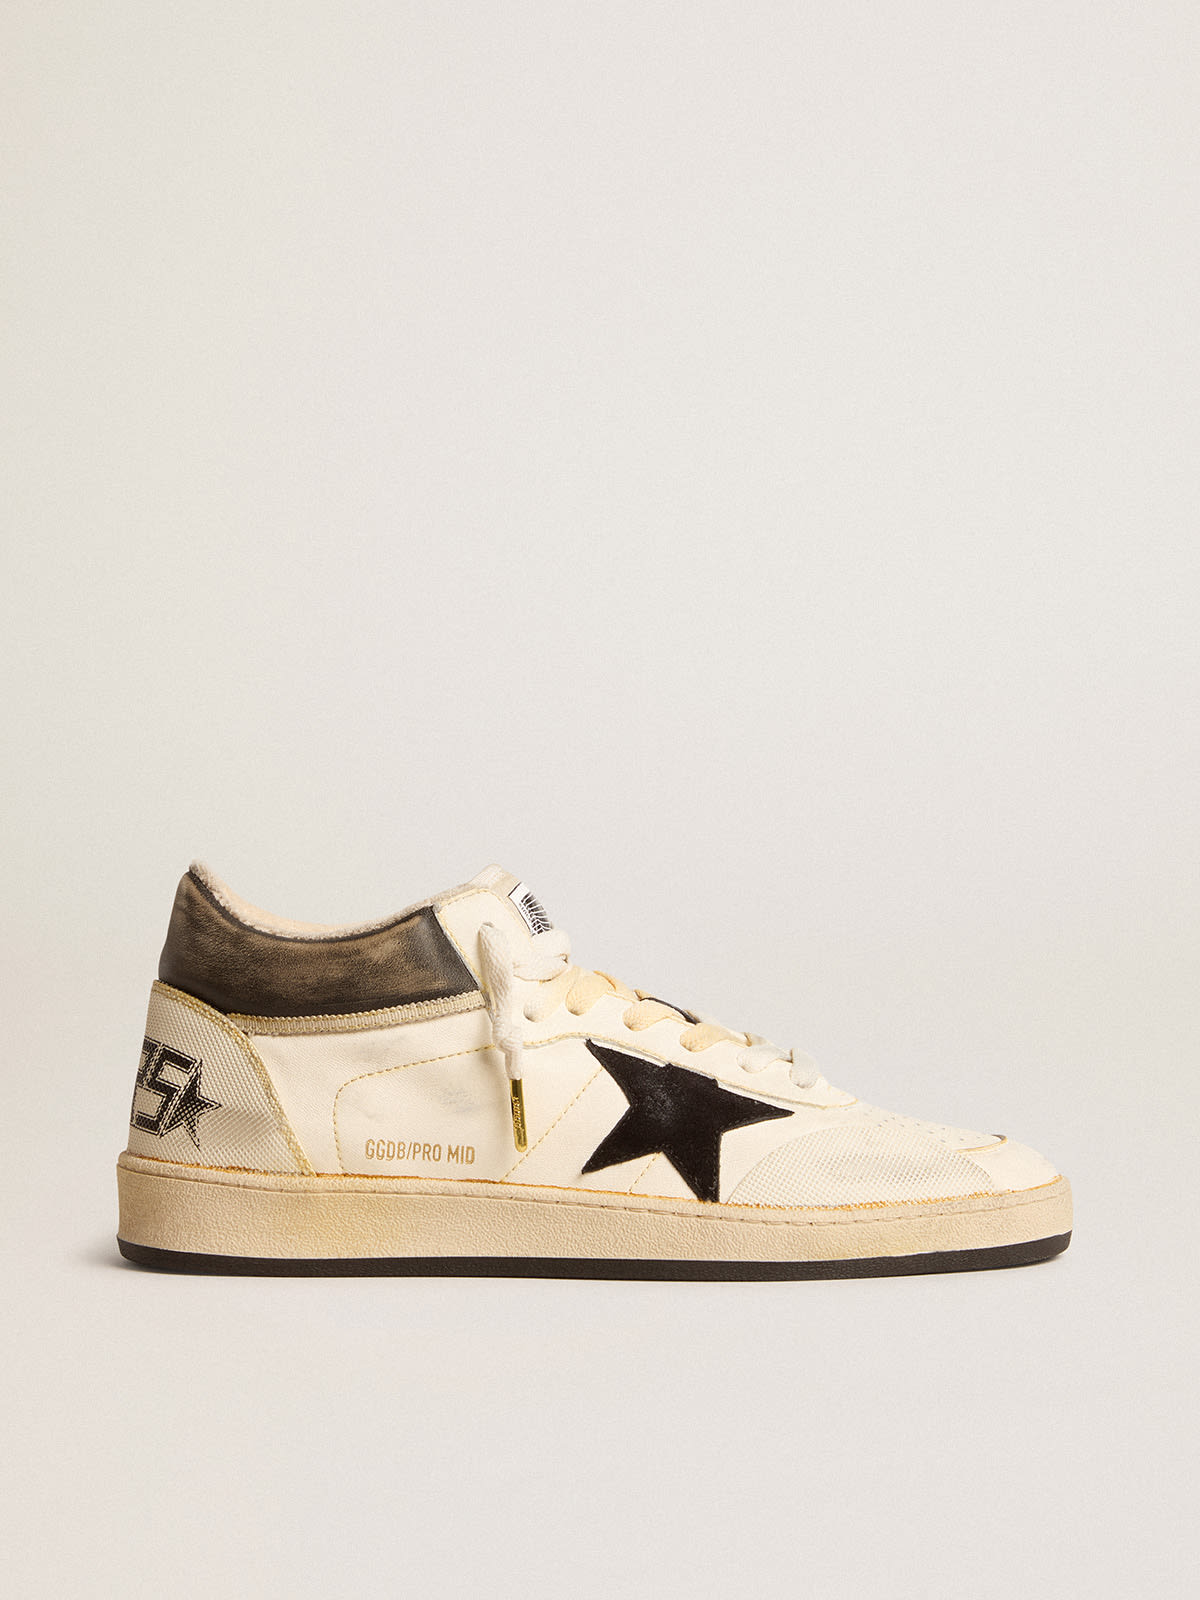 Men’s Ball Star Pro Mid in aged white leather with black star